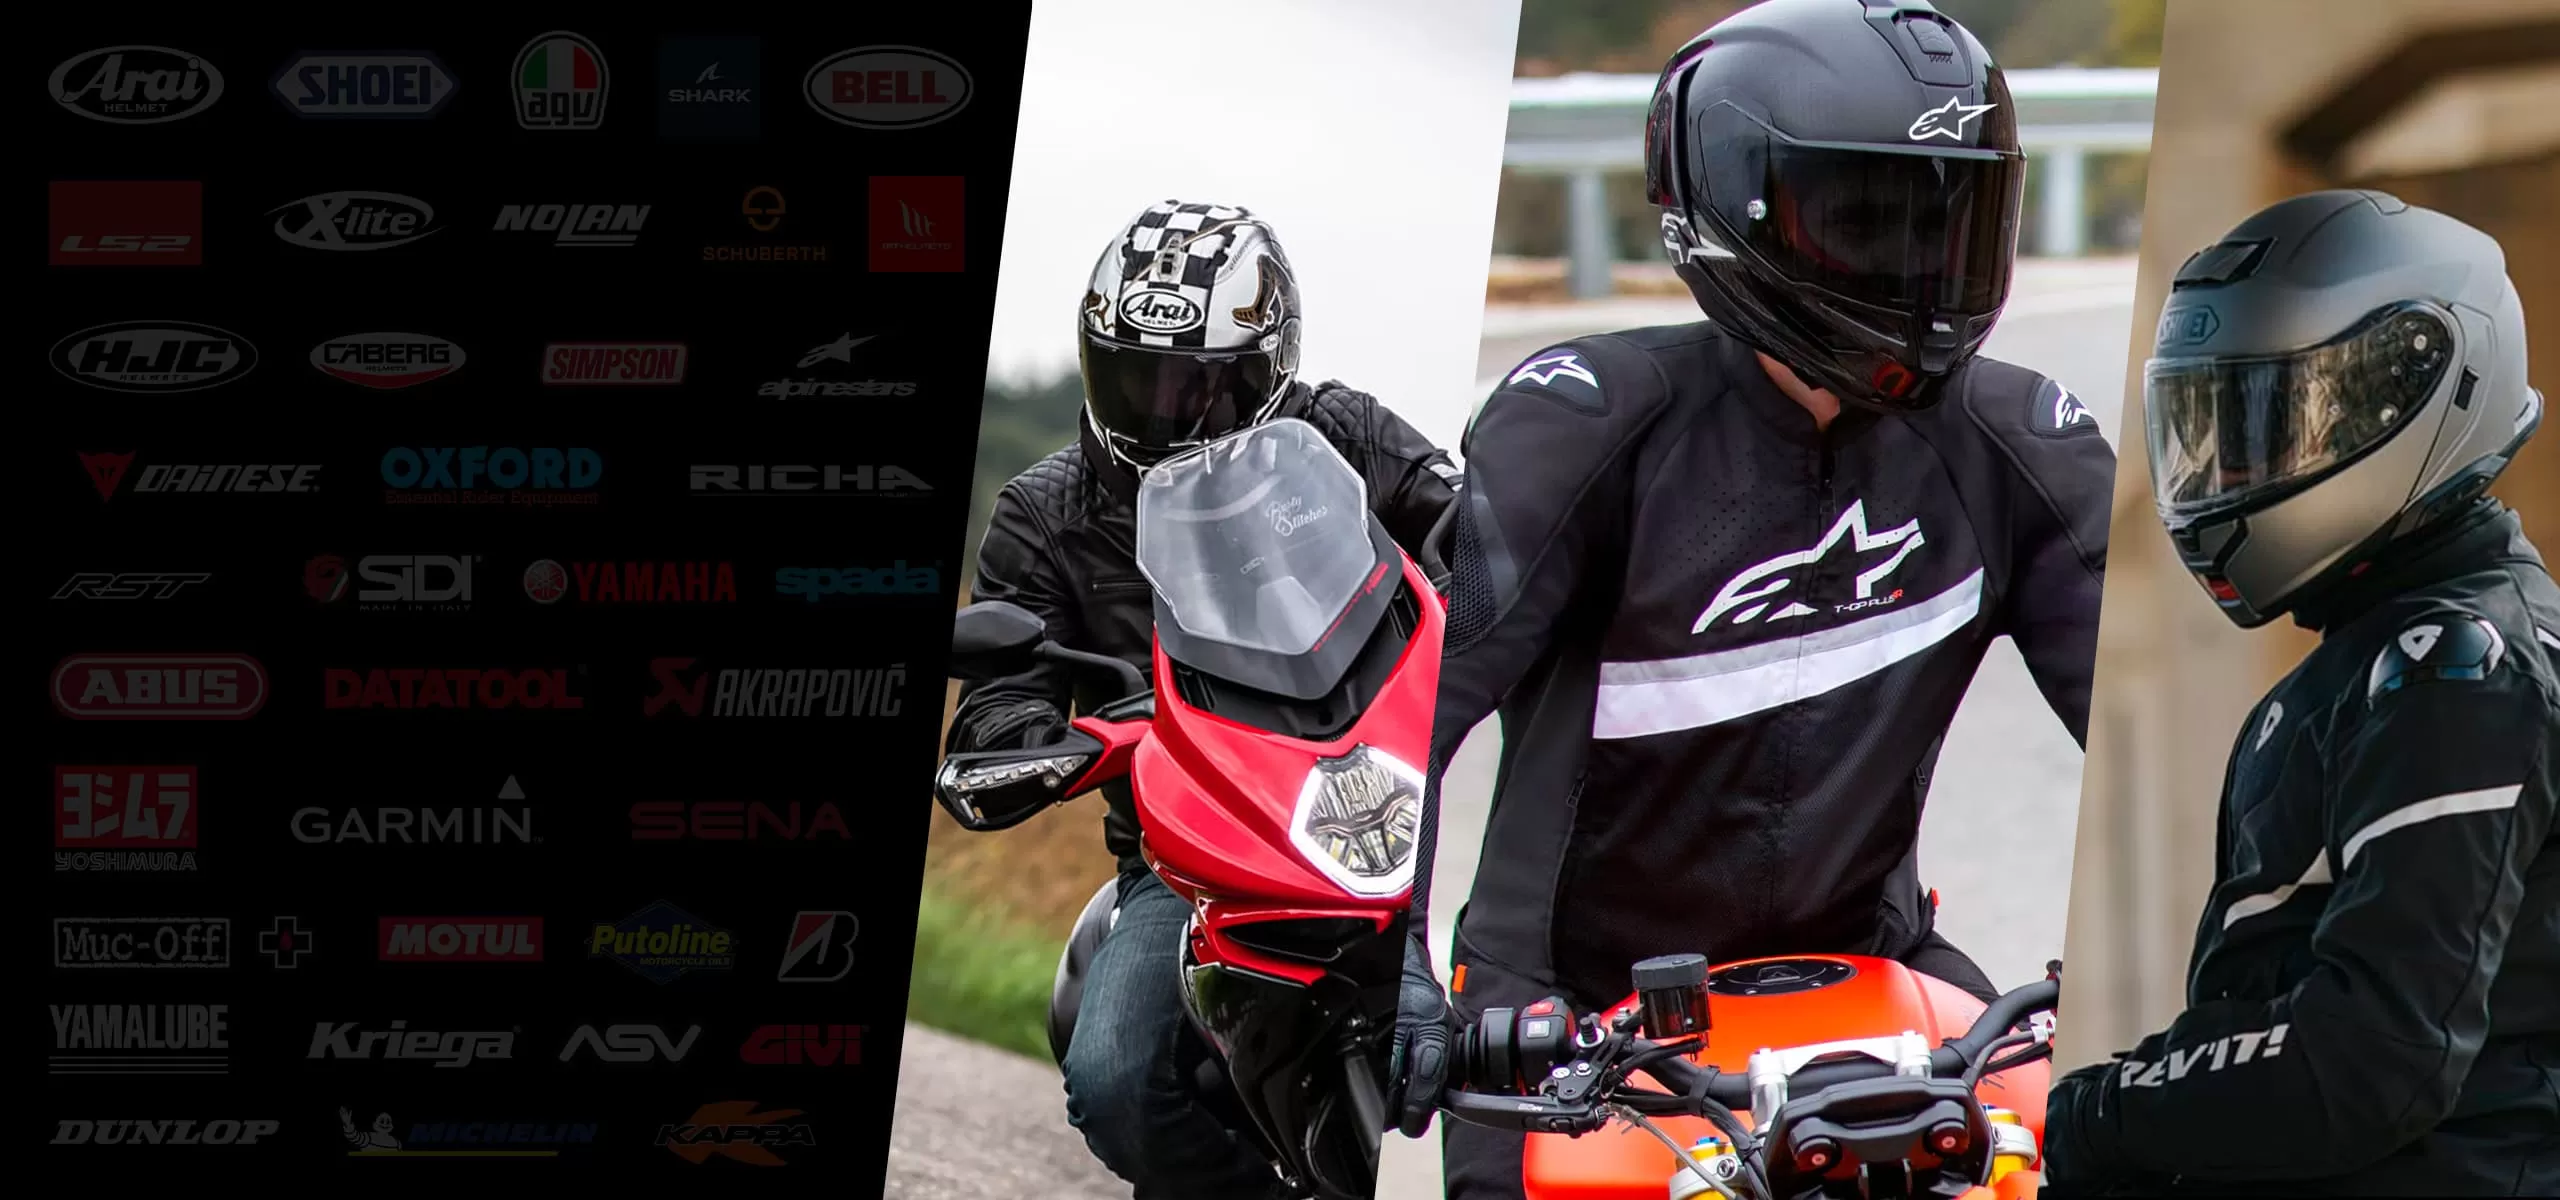 Motorcycle Clothing & Accessories at Alpha Motorcycles